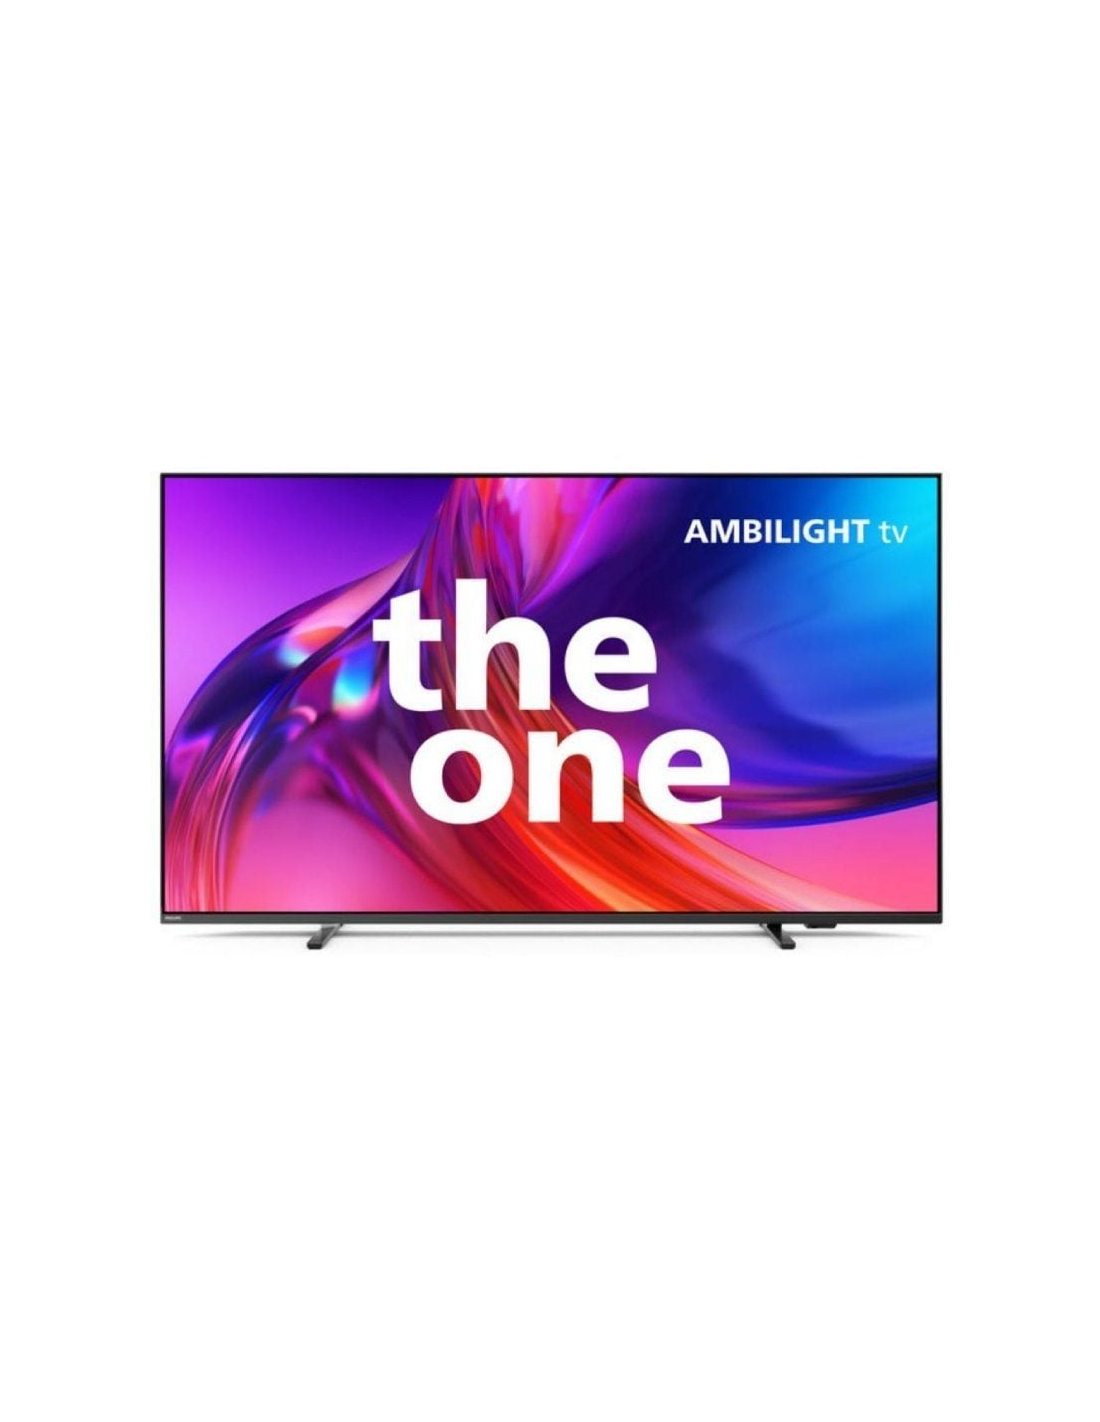 Televisor philips the one 50pus8558 50' - ultra hd 4k - ambilight